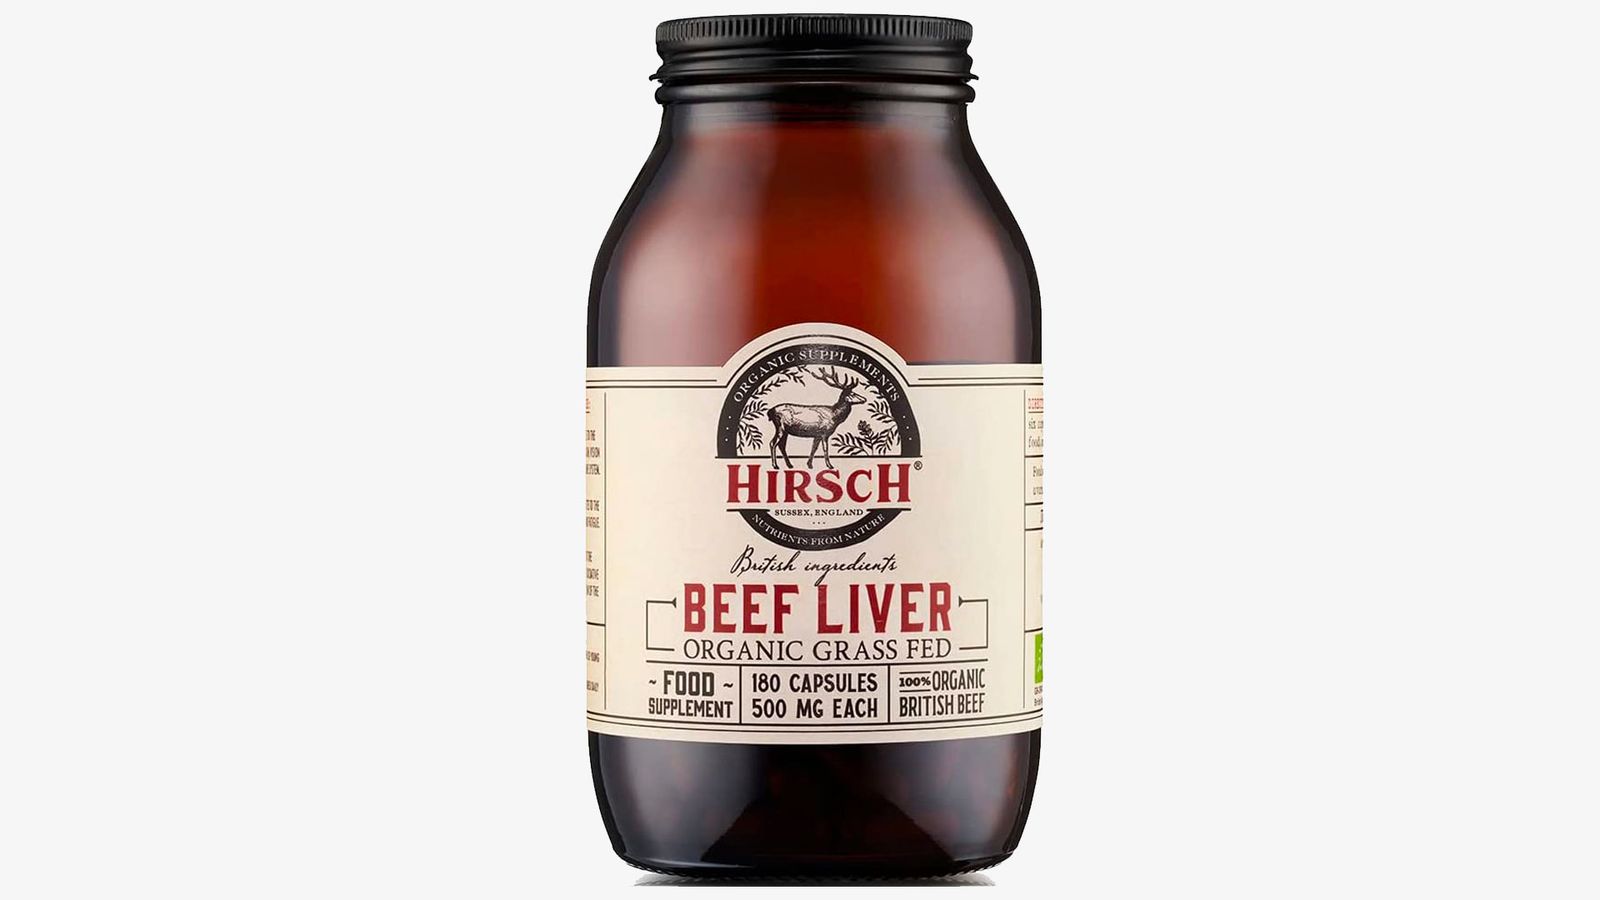 Hirsch Organic Grass Fed Beef Liver Supplement product image of a brown container with light brown and red branding.